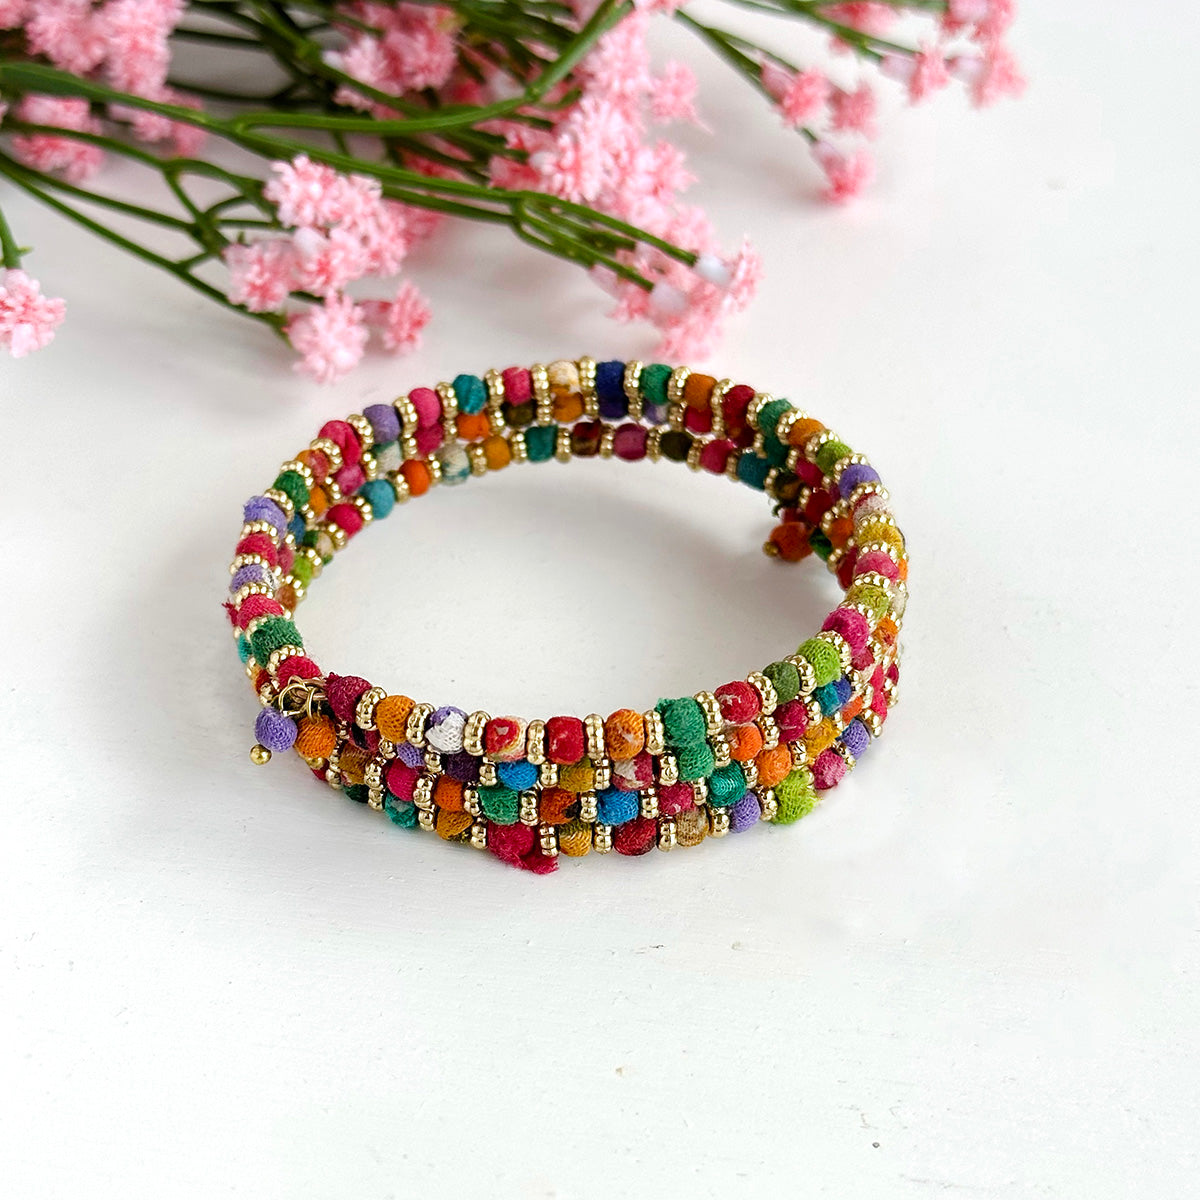 Angelco Accessories mini kantha bead bangle displayed with pink flowers in background